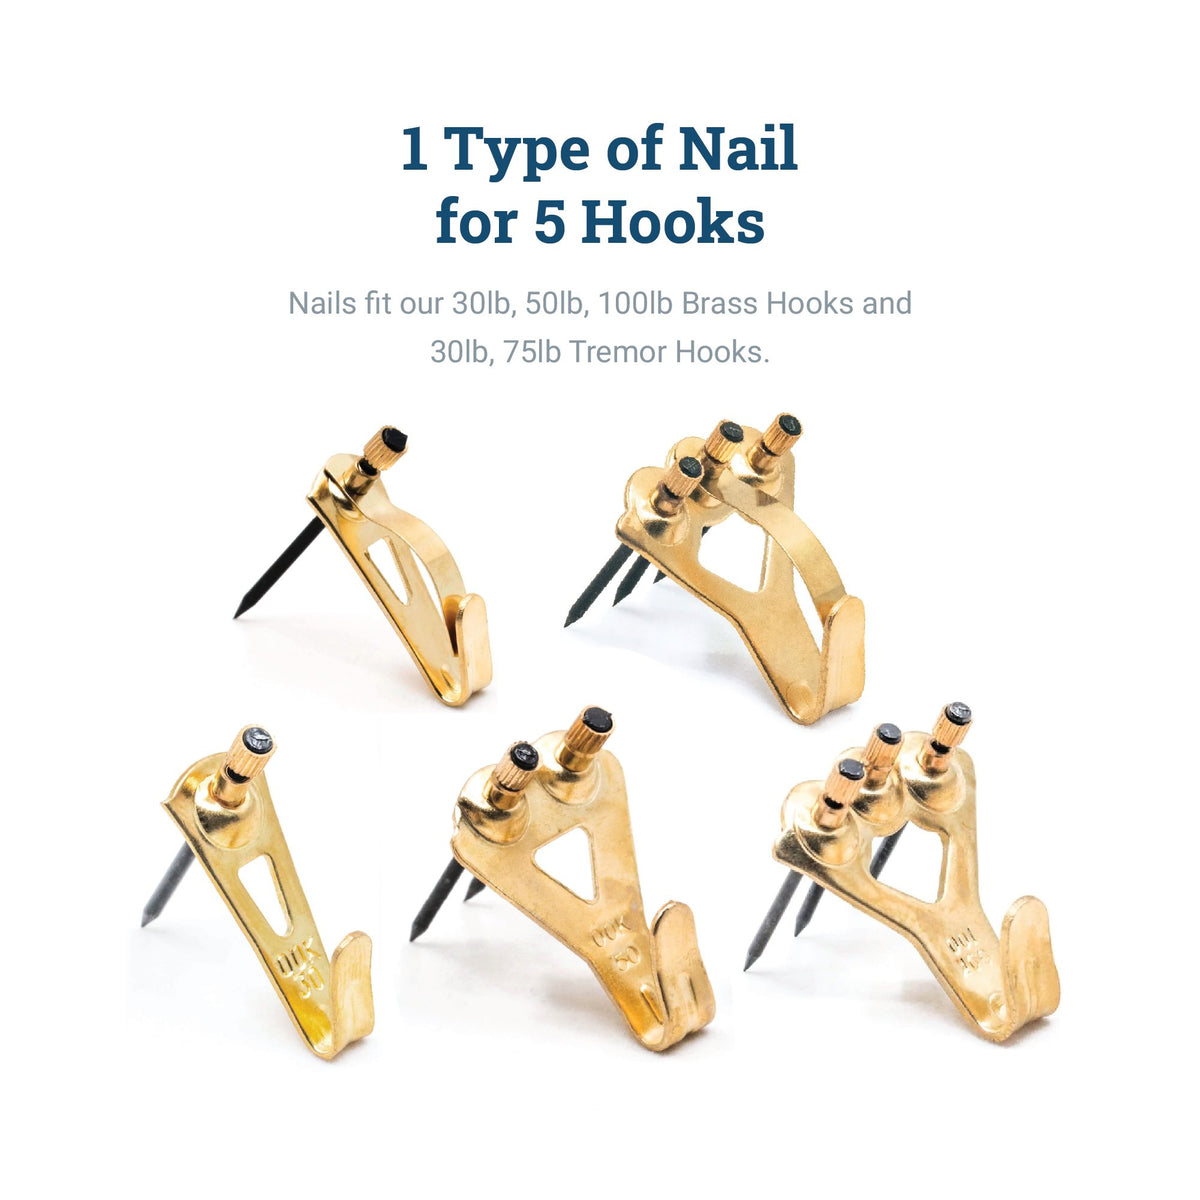 Brass Hook Nails Old Style - 100 Pack - HWR-2332-NLS - Picture Hang Solutions